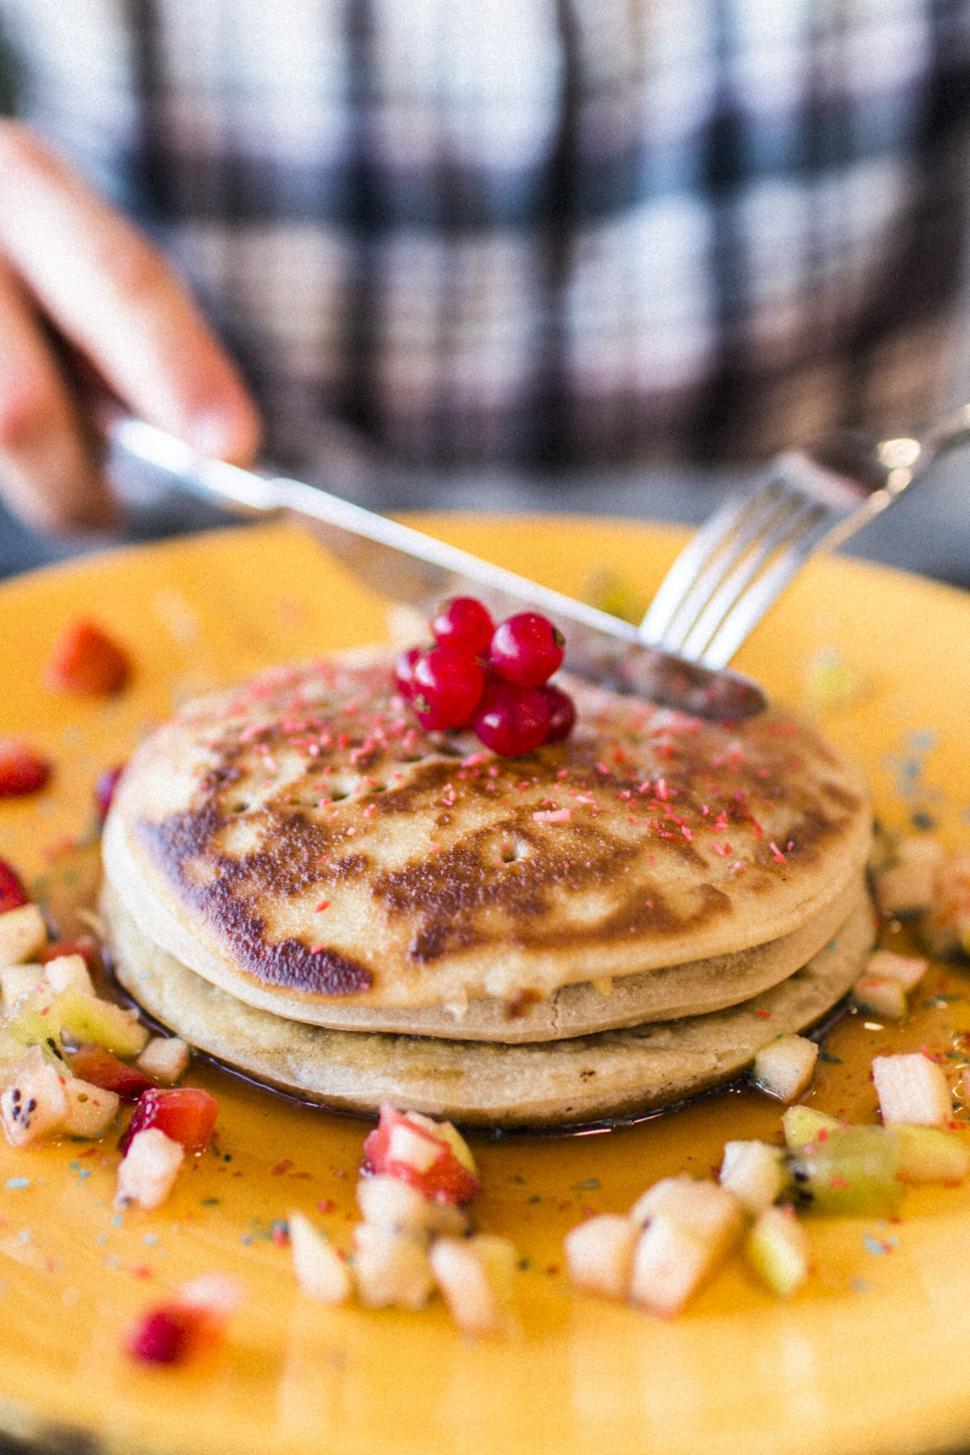 Free Image of A fork and knife cutting a stack of pancakes with fruit 